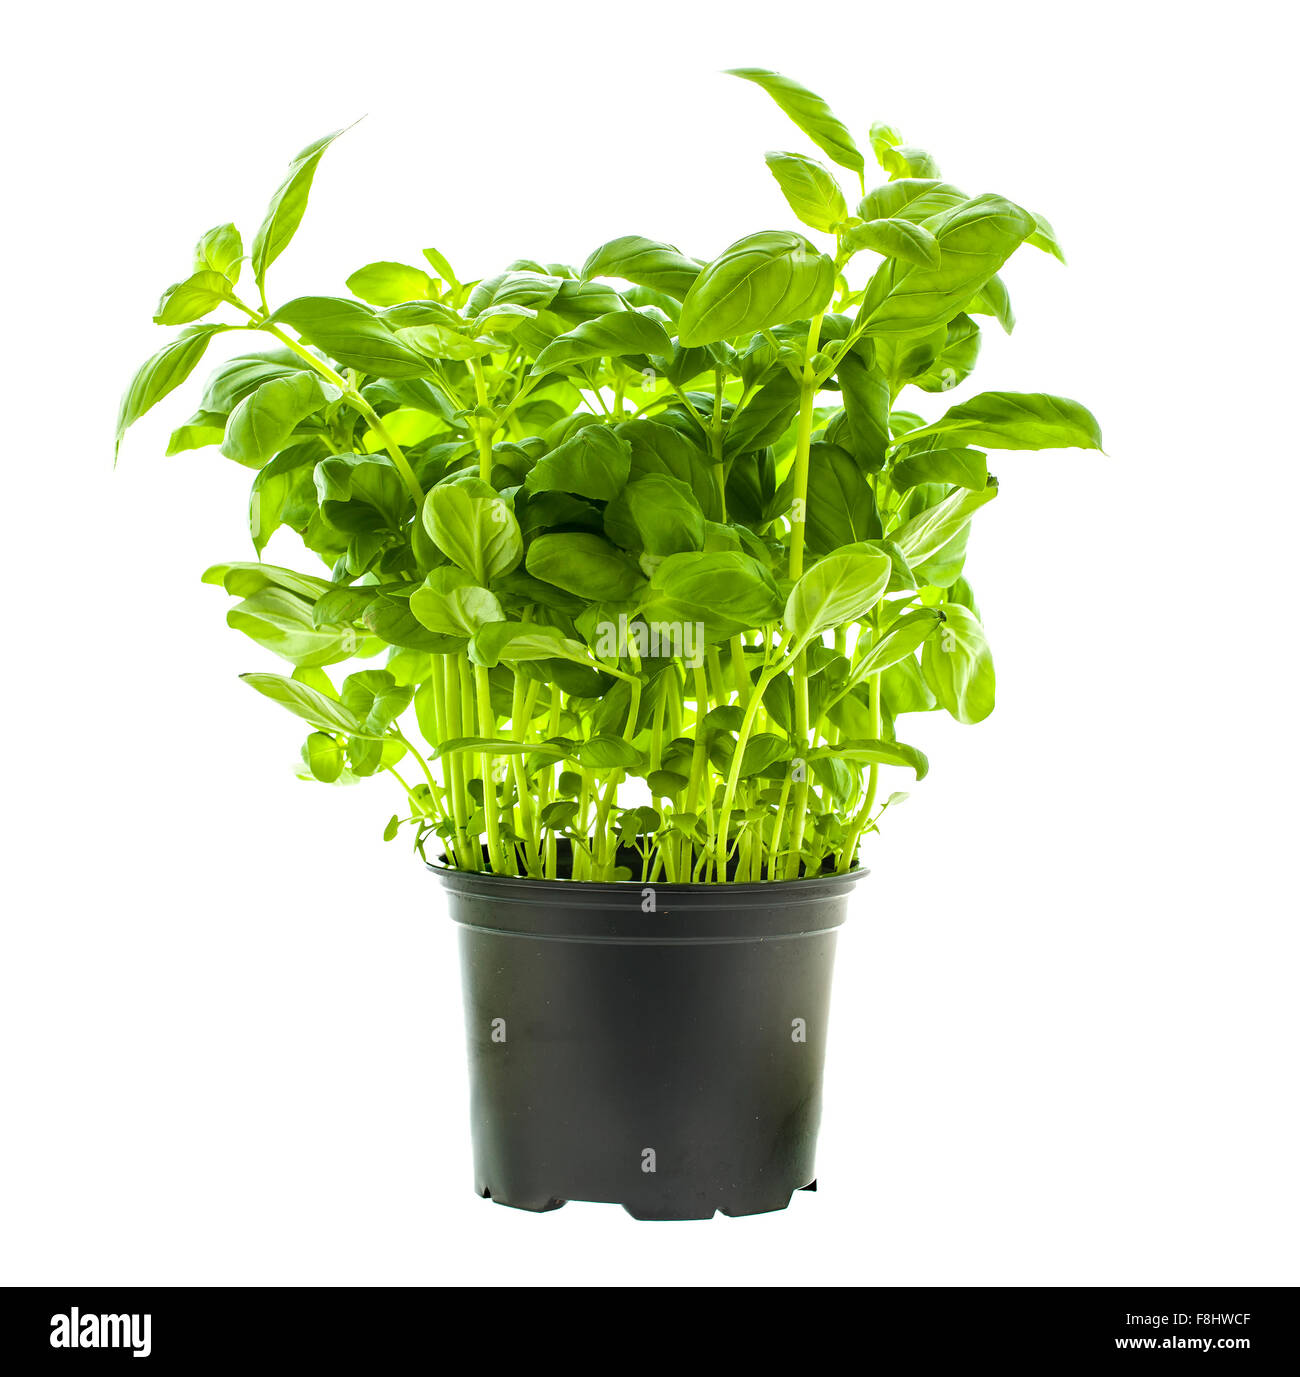 Basil Plant in a Black Pot on a White background Stock Photo